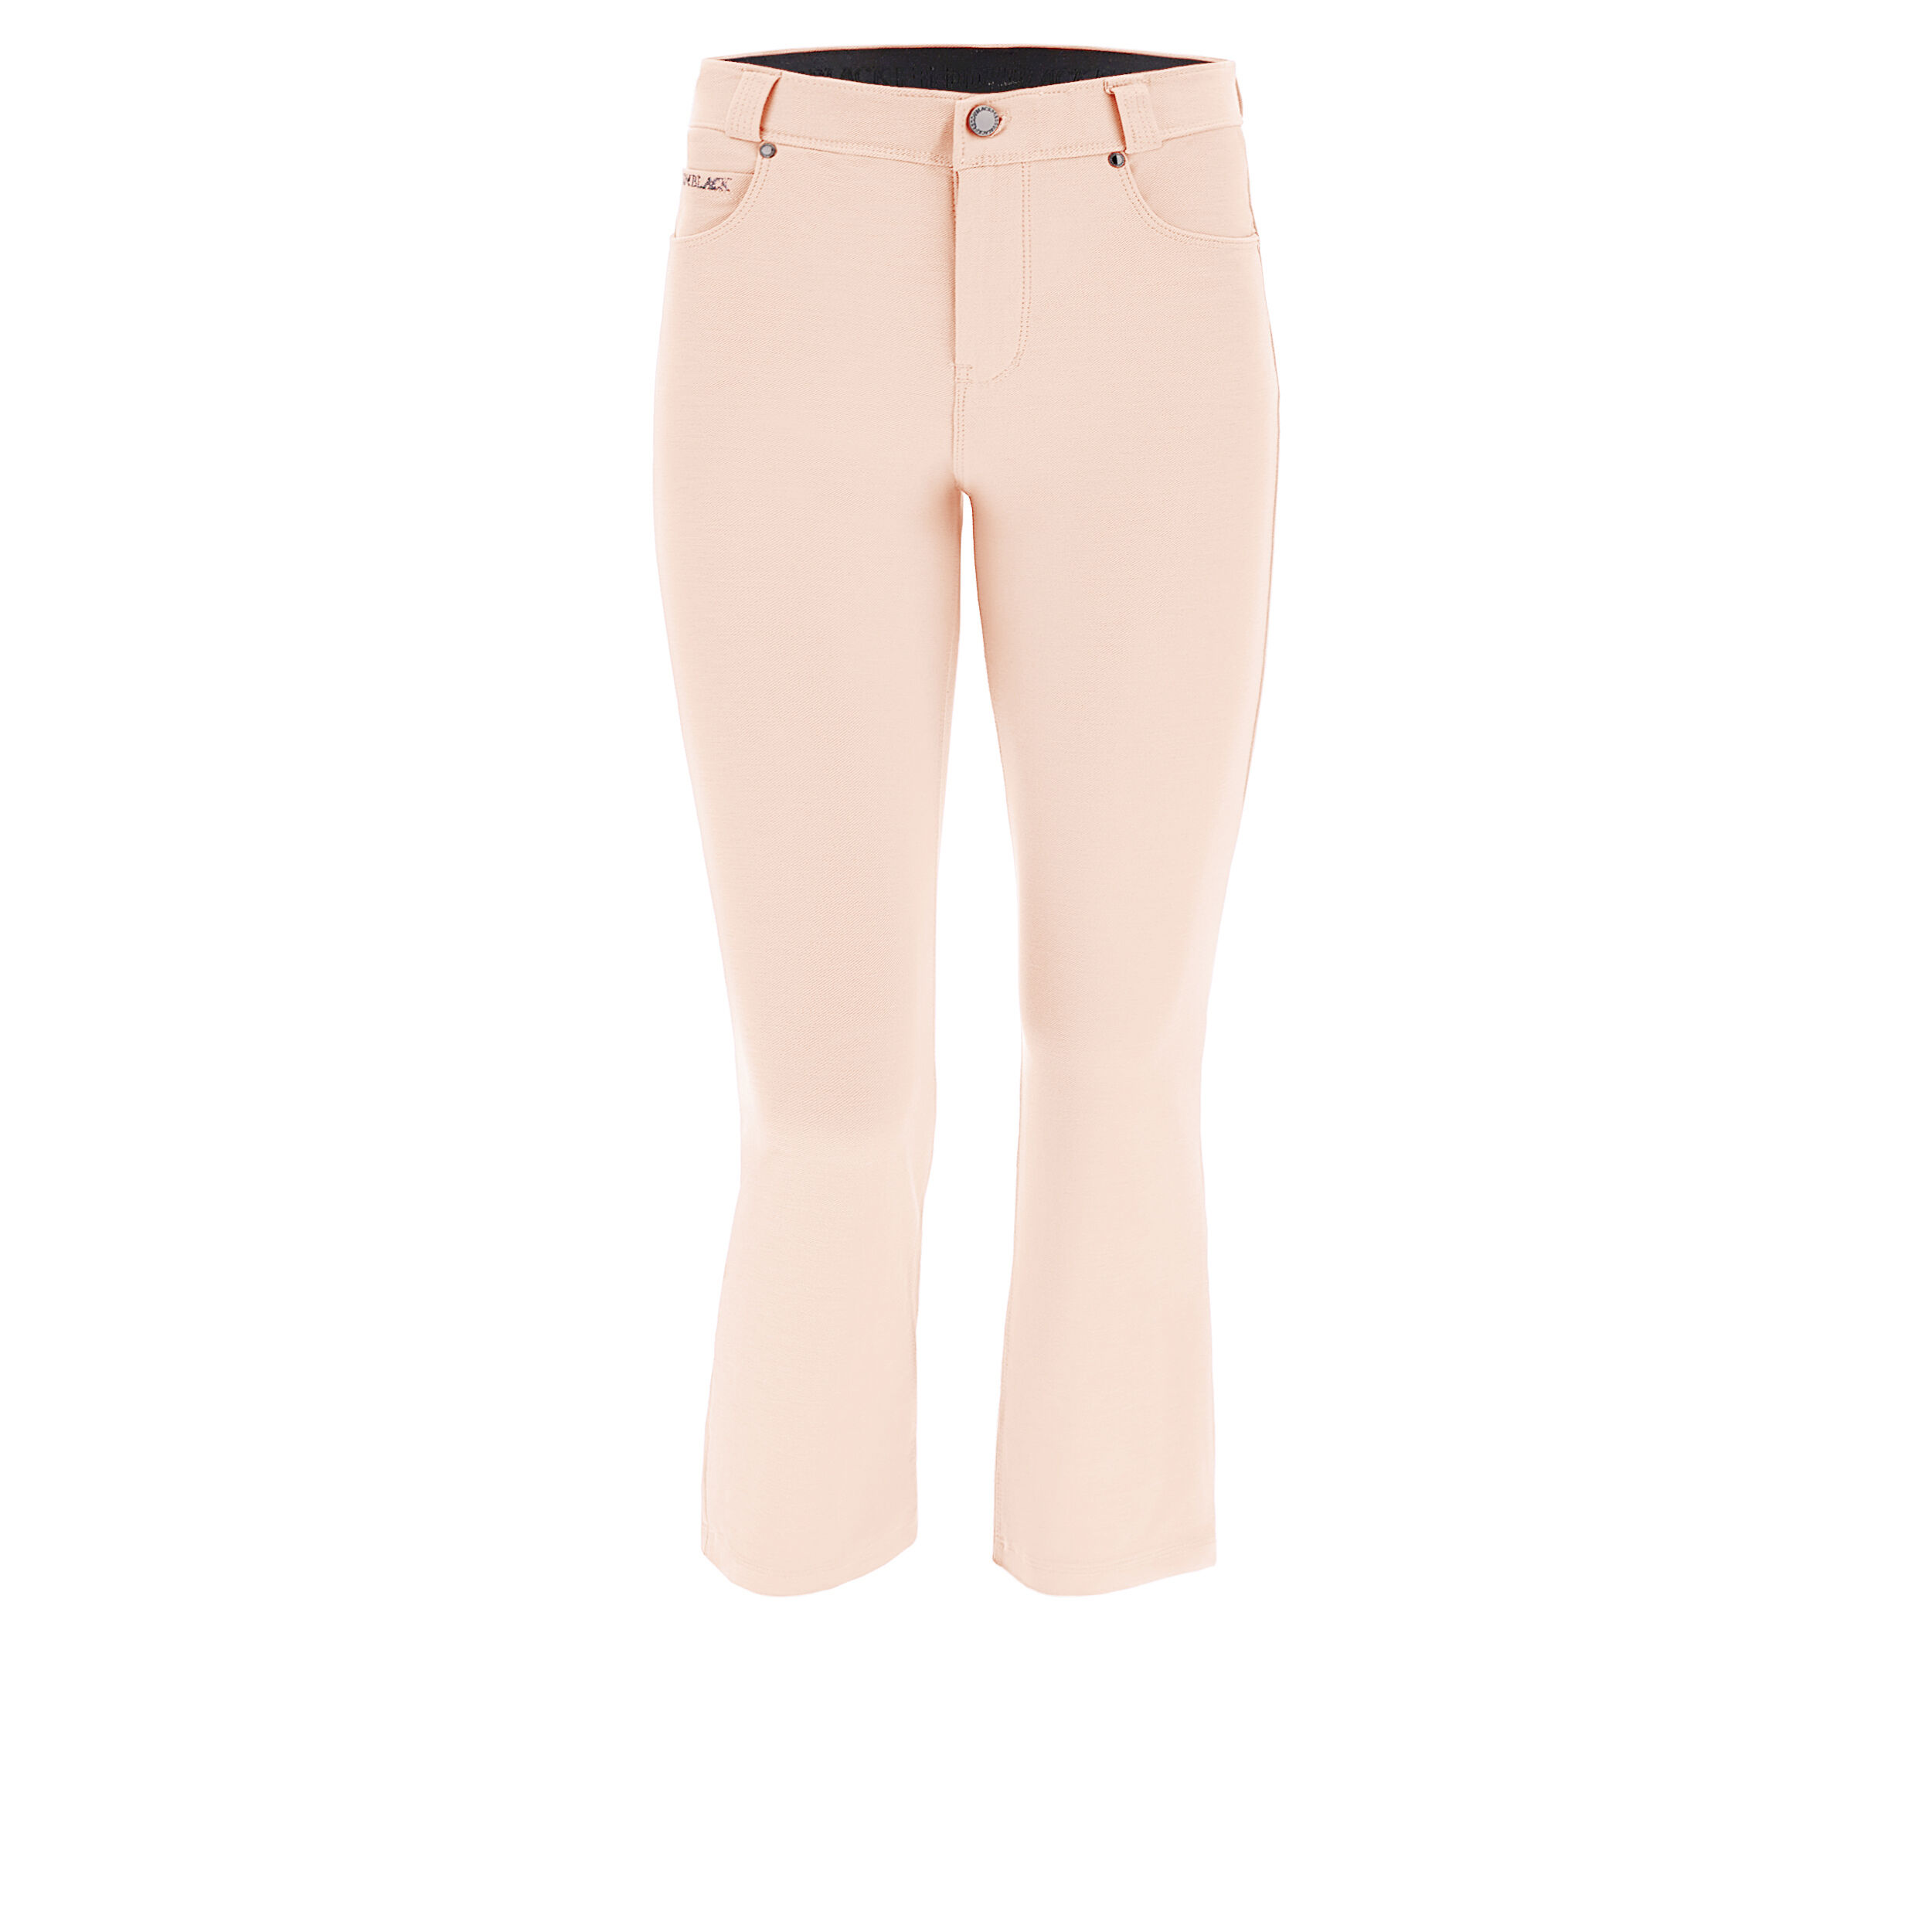 Freddy Pantaloni cropped in jersey drill colorato Peachy Keen Donna Large